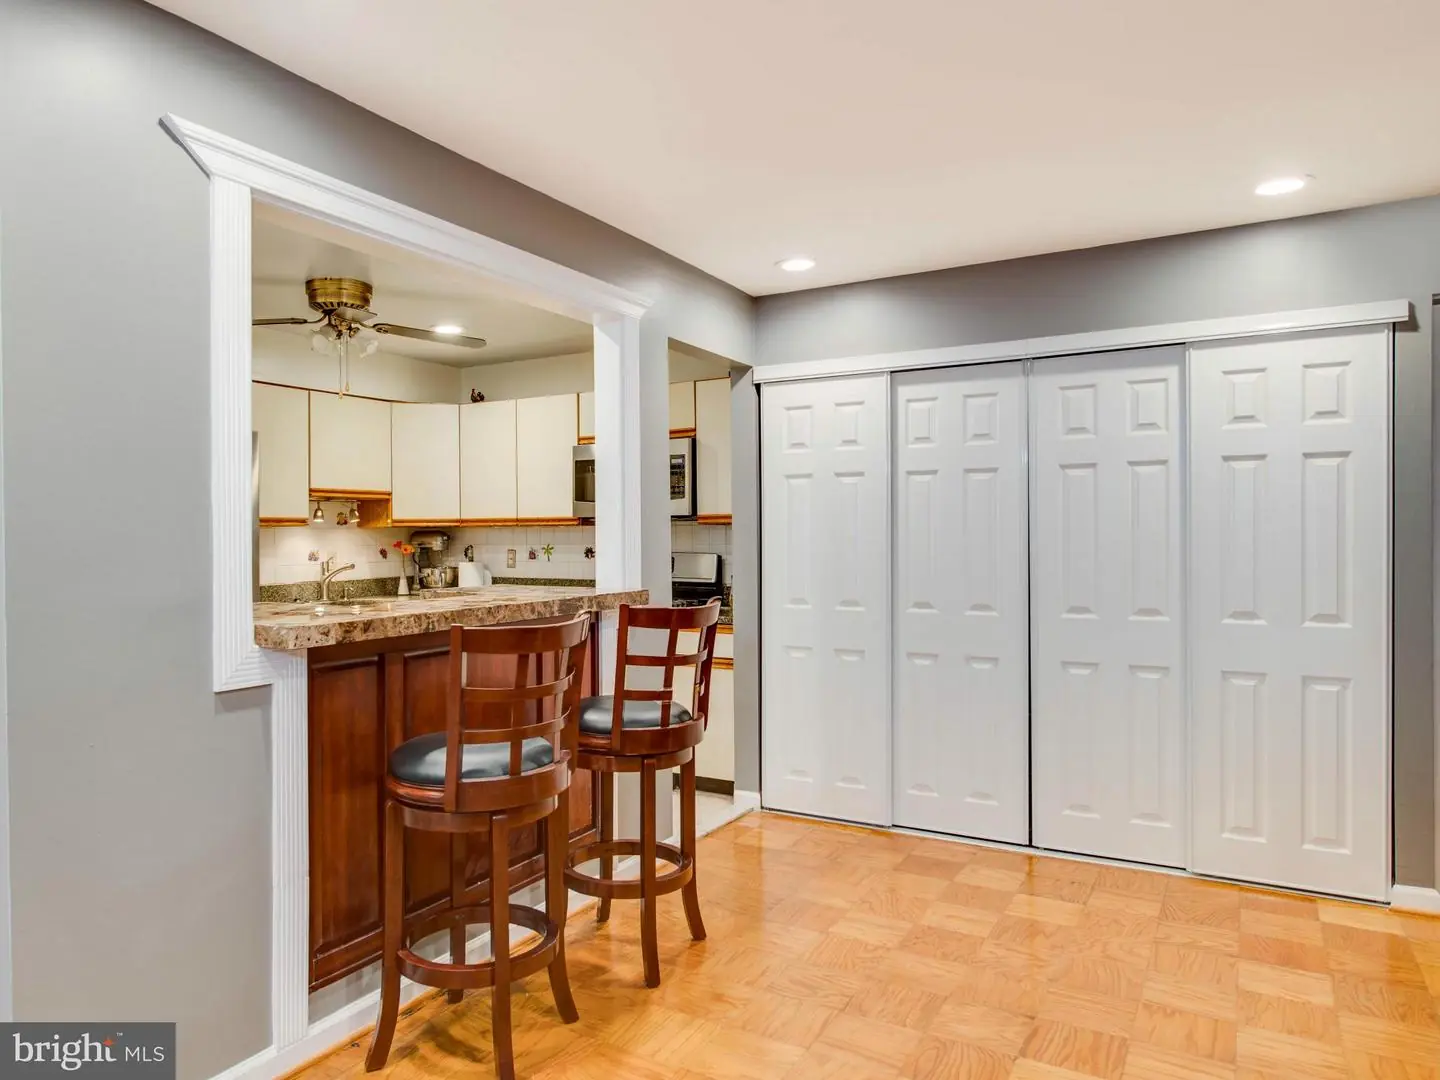 1001783909-121242437731-2021-09-05-21-13-34  |  Heritage Court | Annandale Delaware Real Estate For Sale | MLS# 1001783909  - Best of Northern Virginia